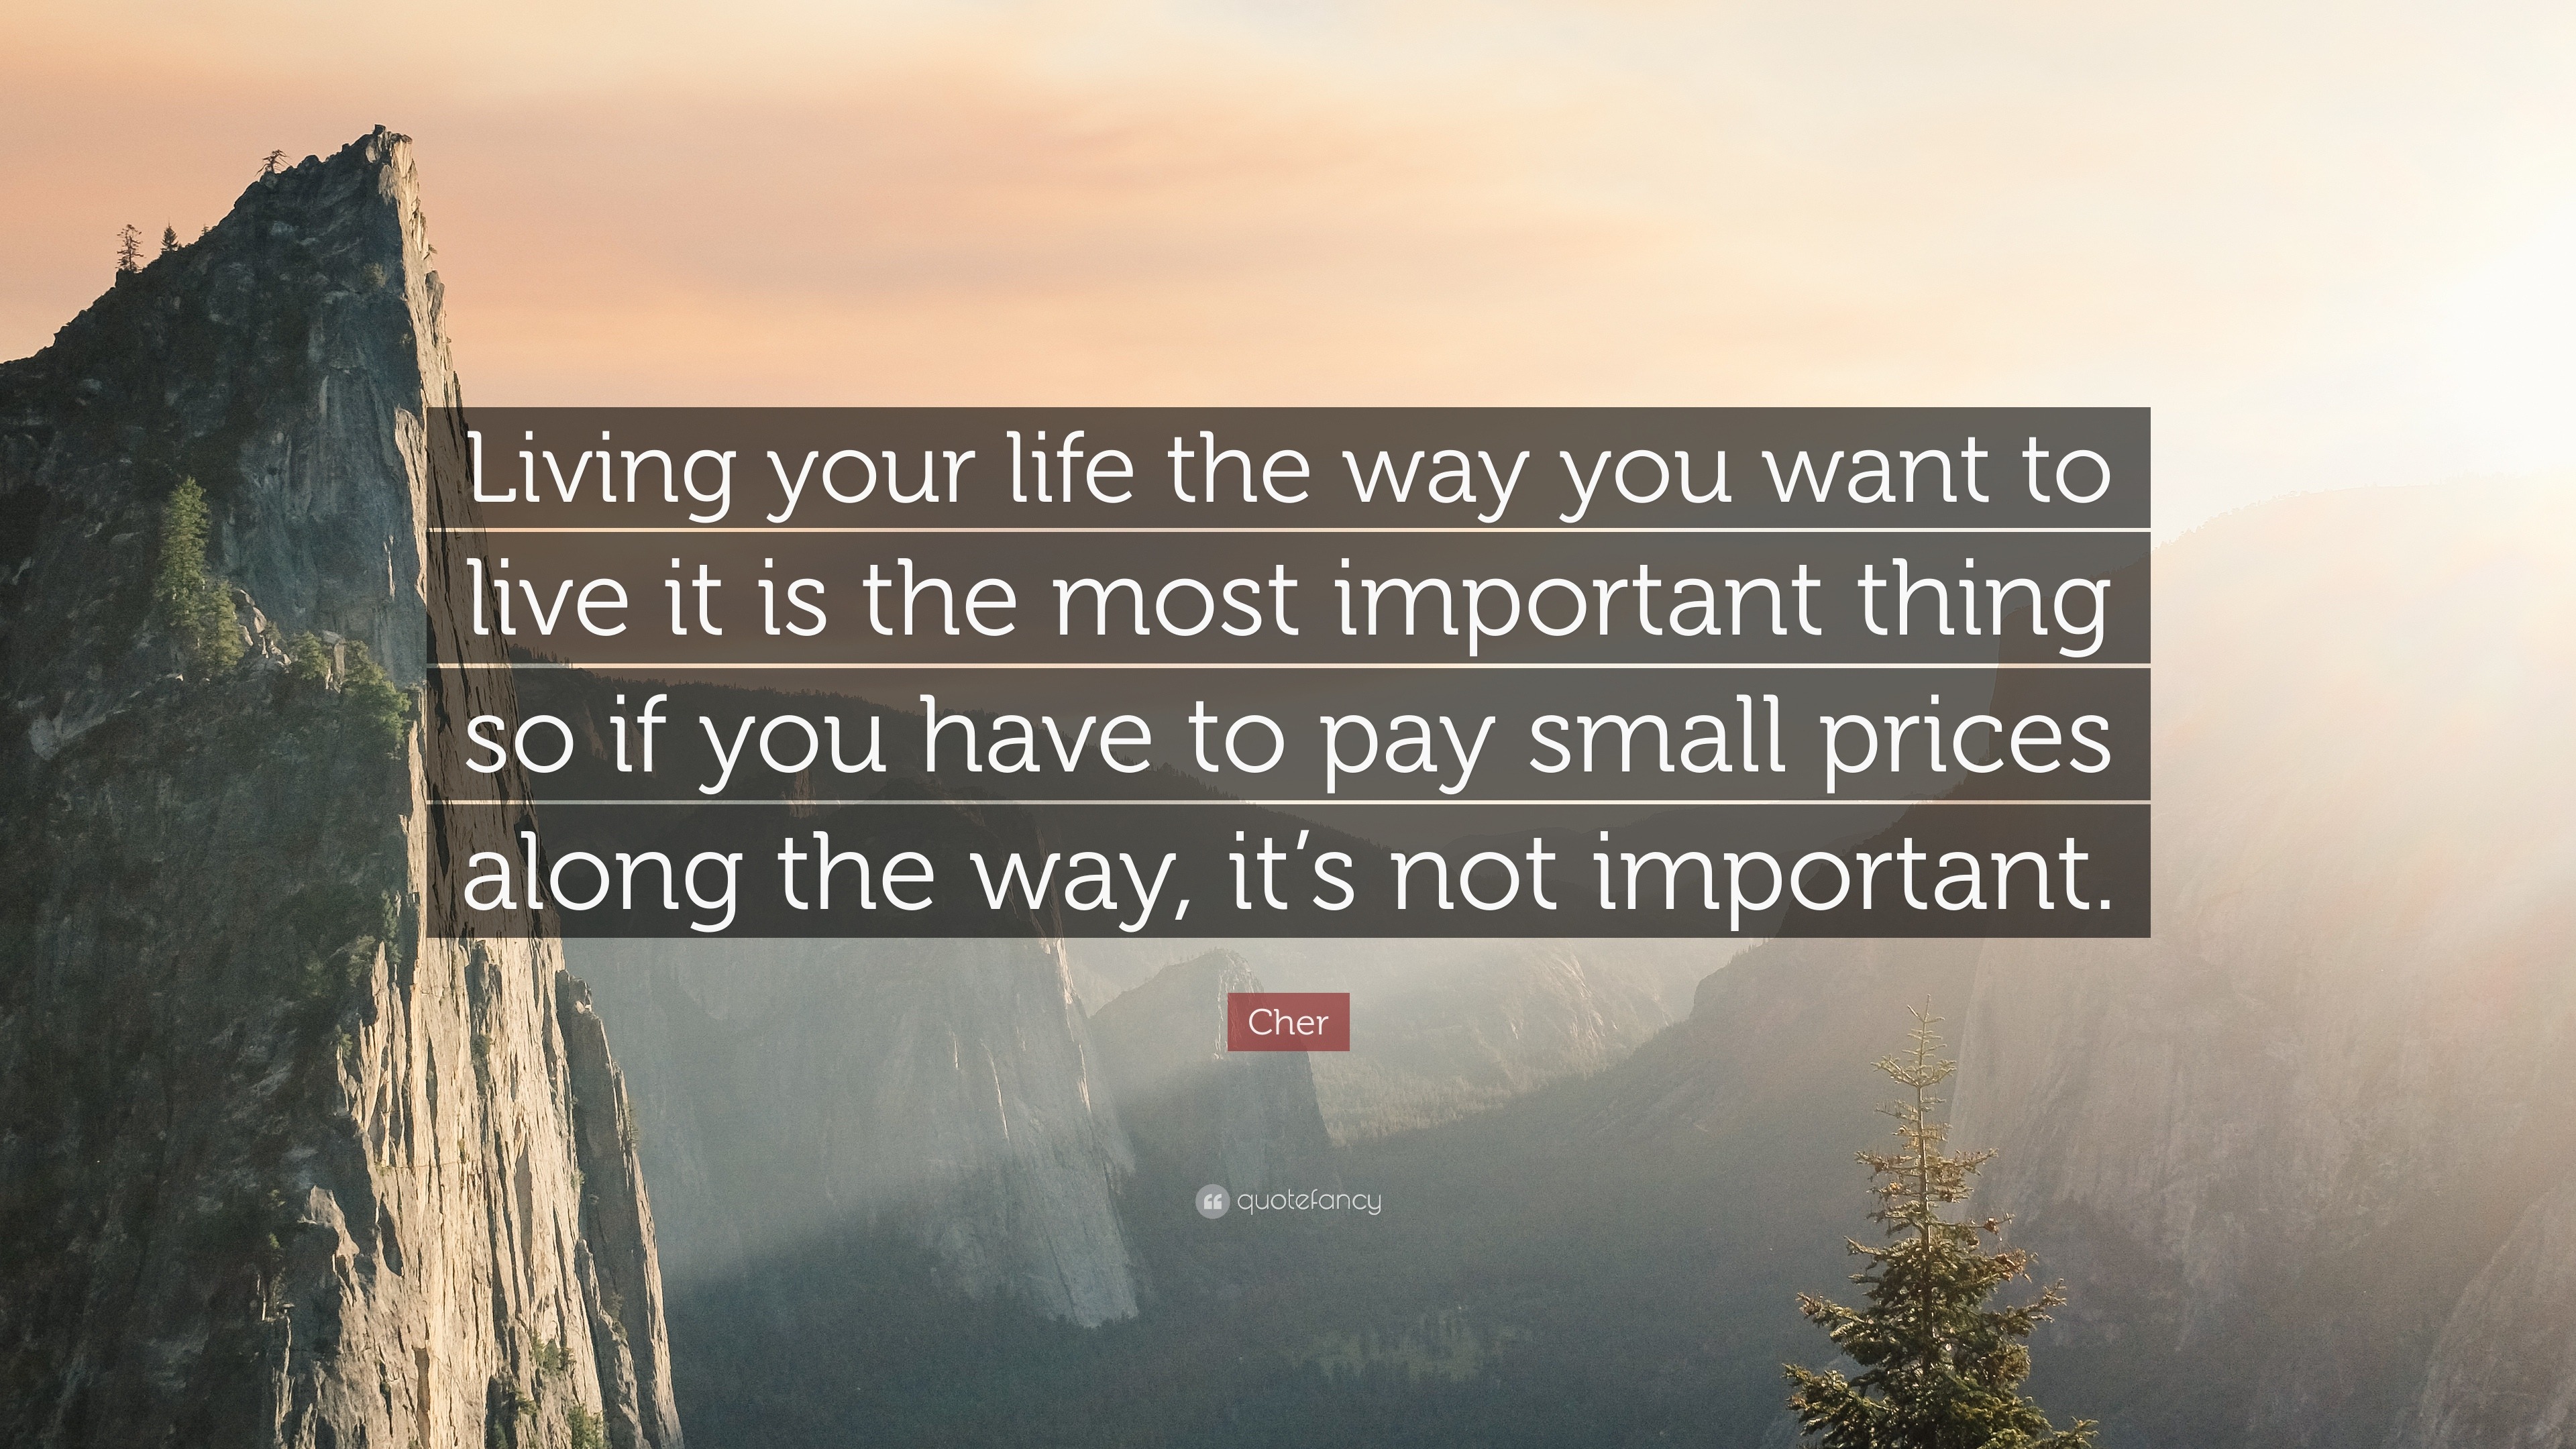 Cher Quote Living Your Life The Way You Want To Live It Is The Most Important Thing So If You Have To Pay Small Prices Along The Wa